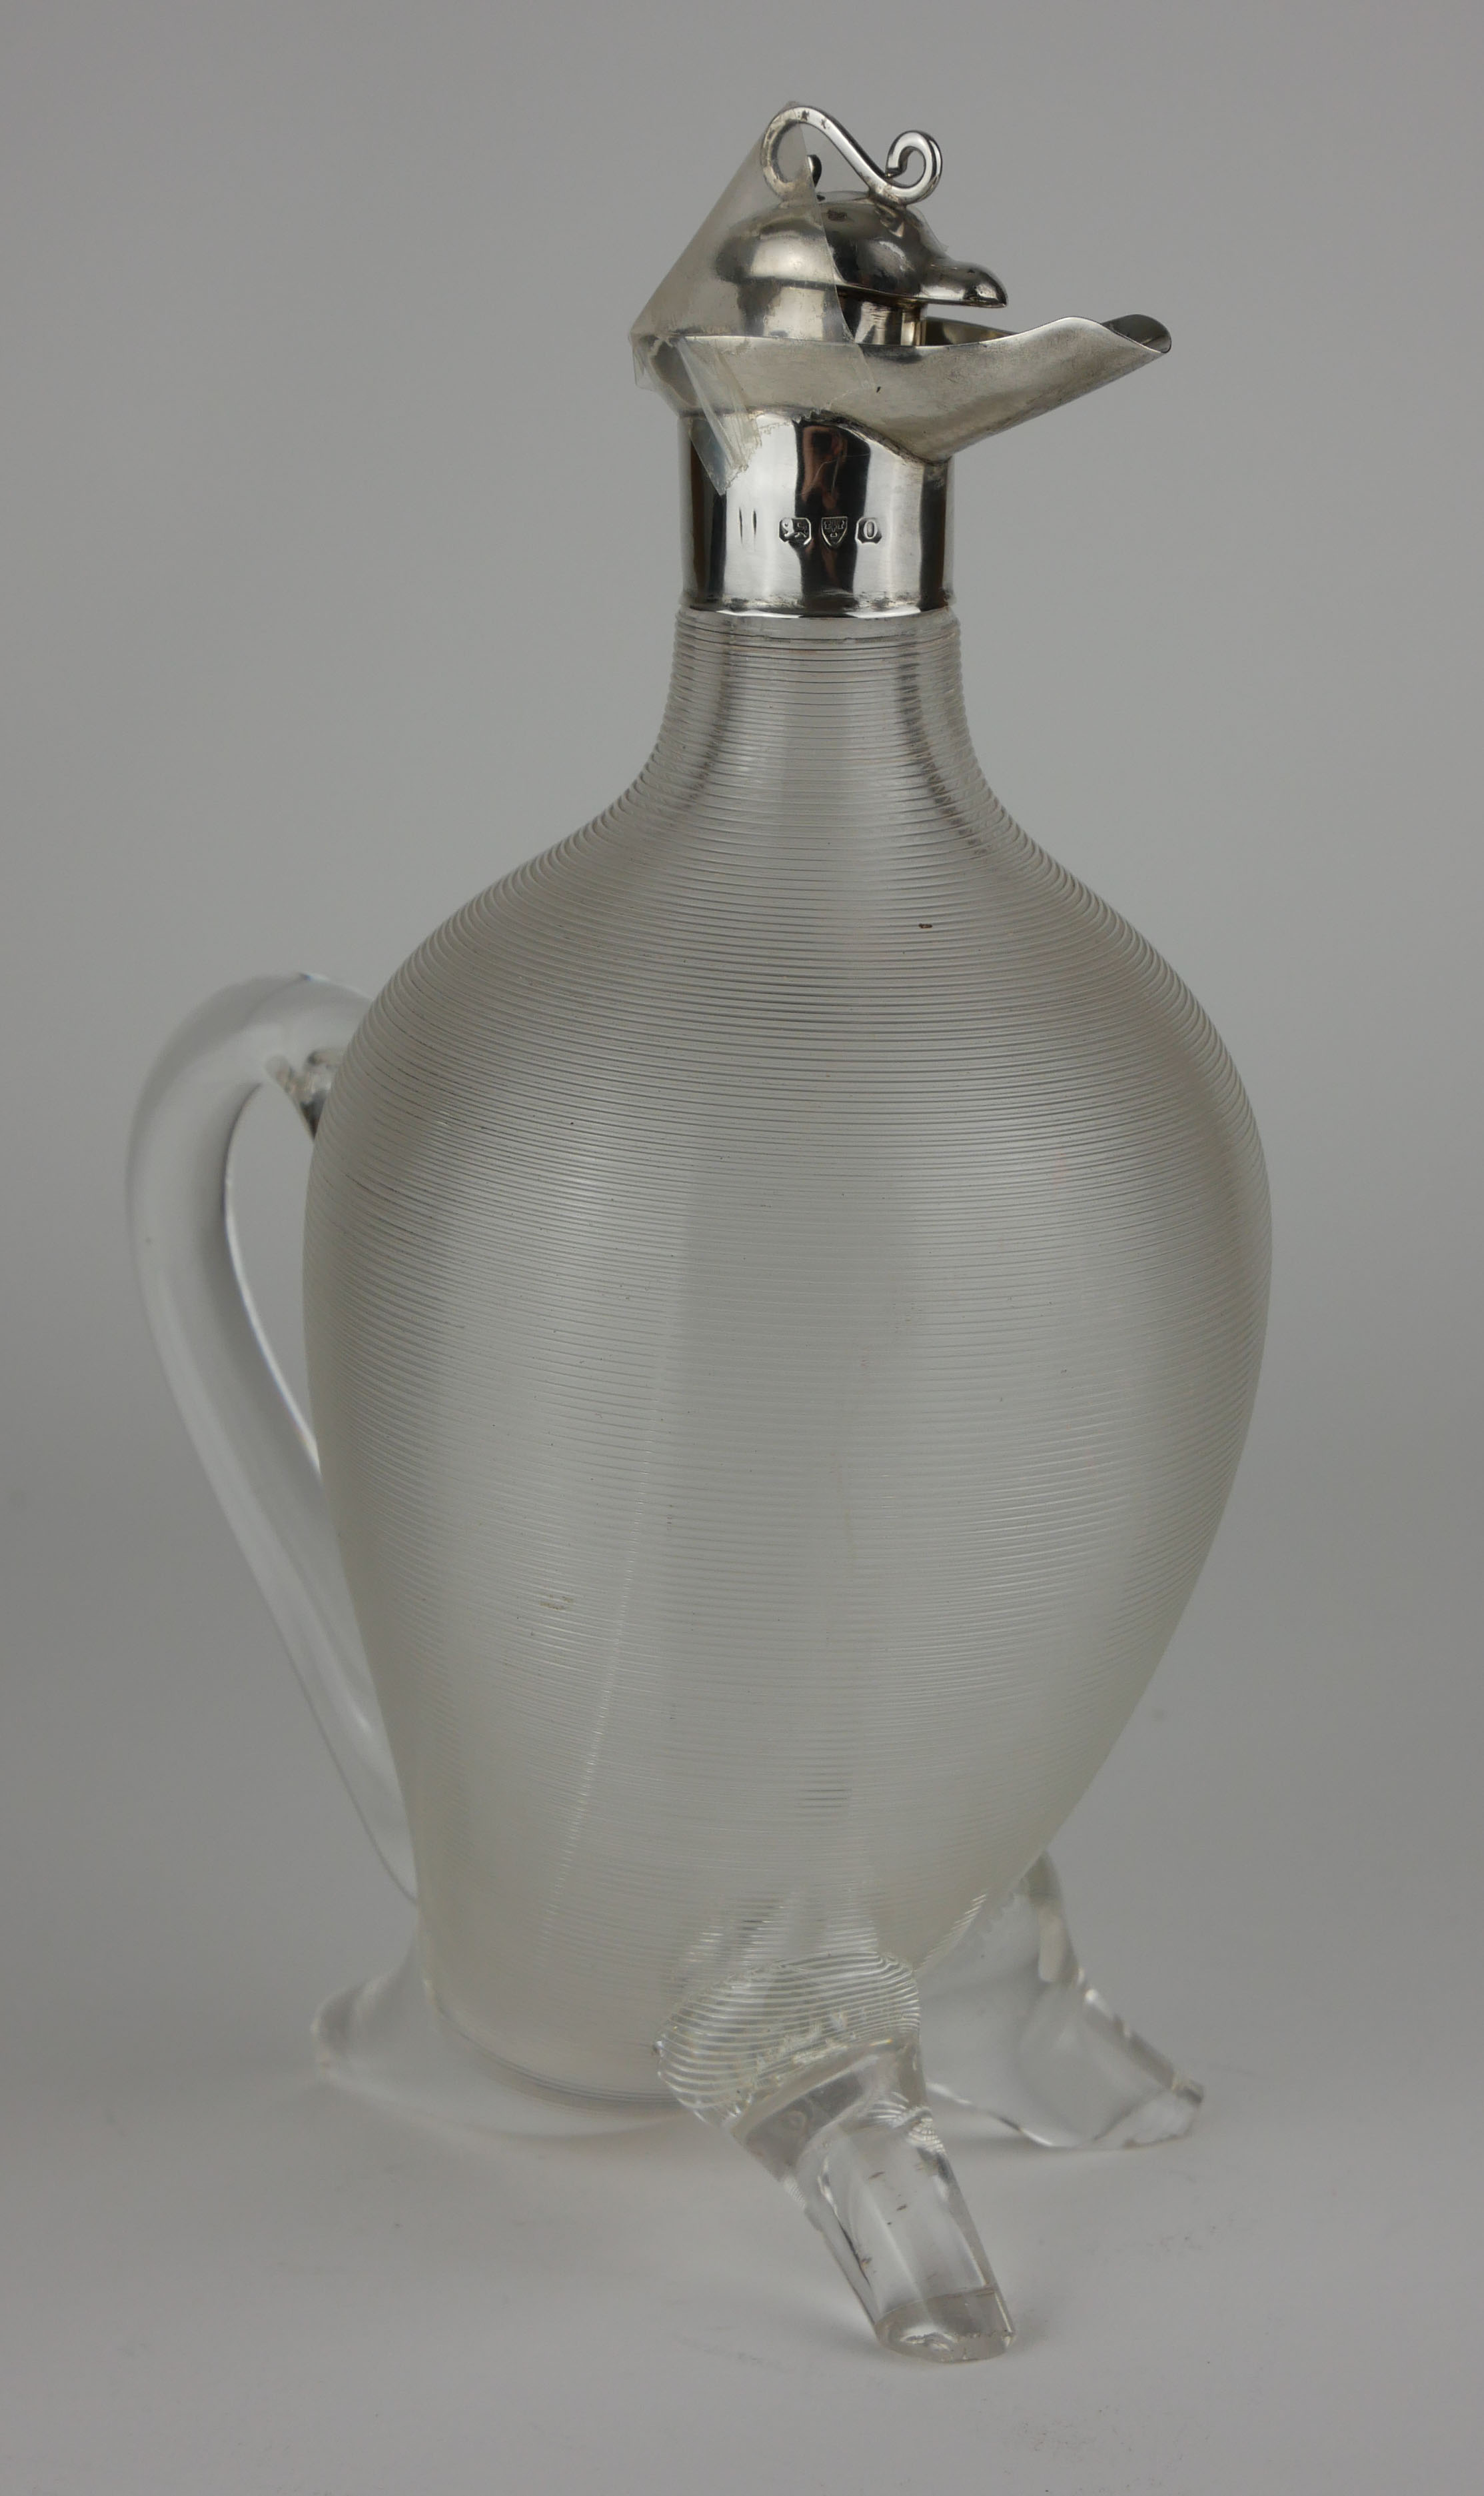 A VICTORIAN SILVER AND GLASS NOVELTY 'DUCK' CLARET JUG Having a silver stopper and collar, clear